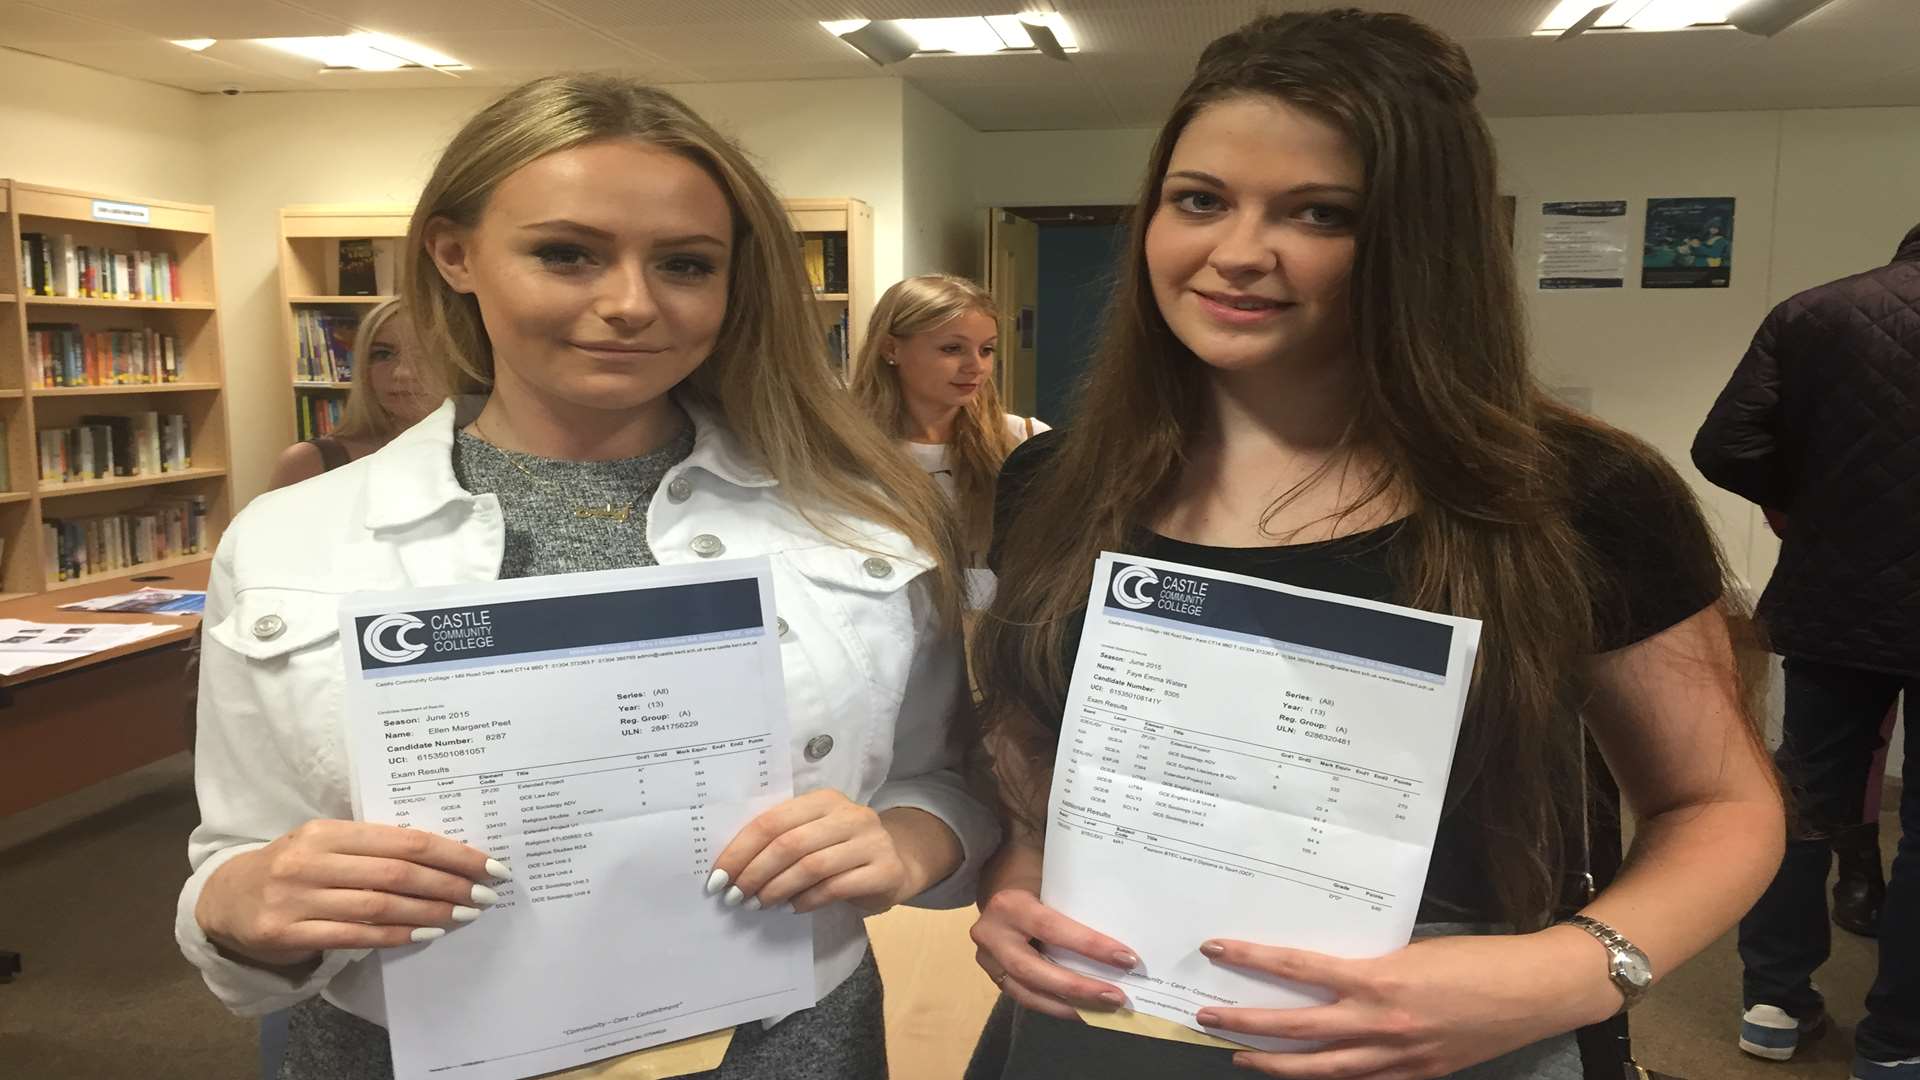 Castle Community College students Ellen Peet and Faye Water both gained university places